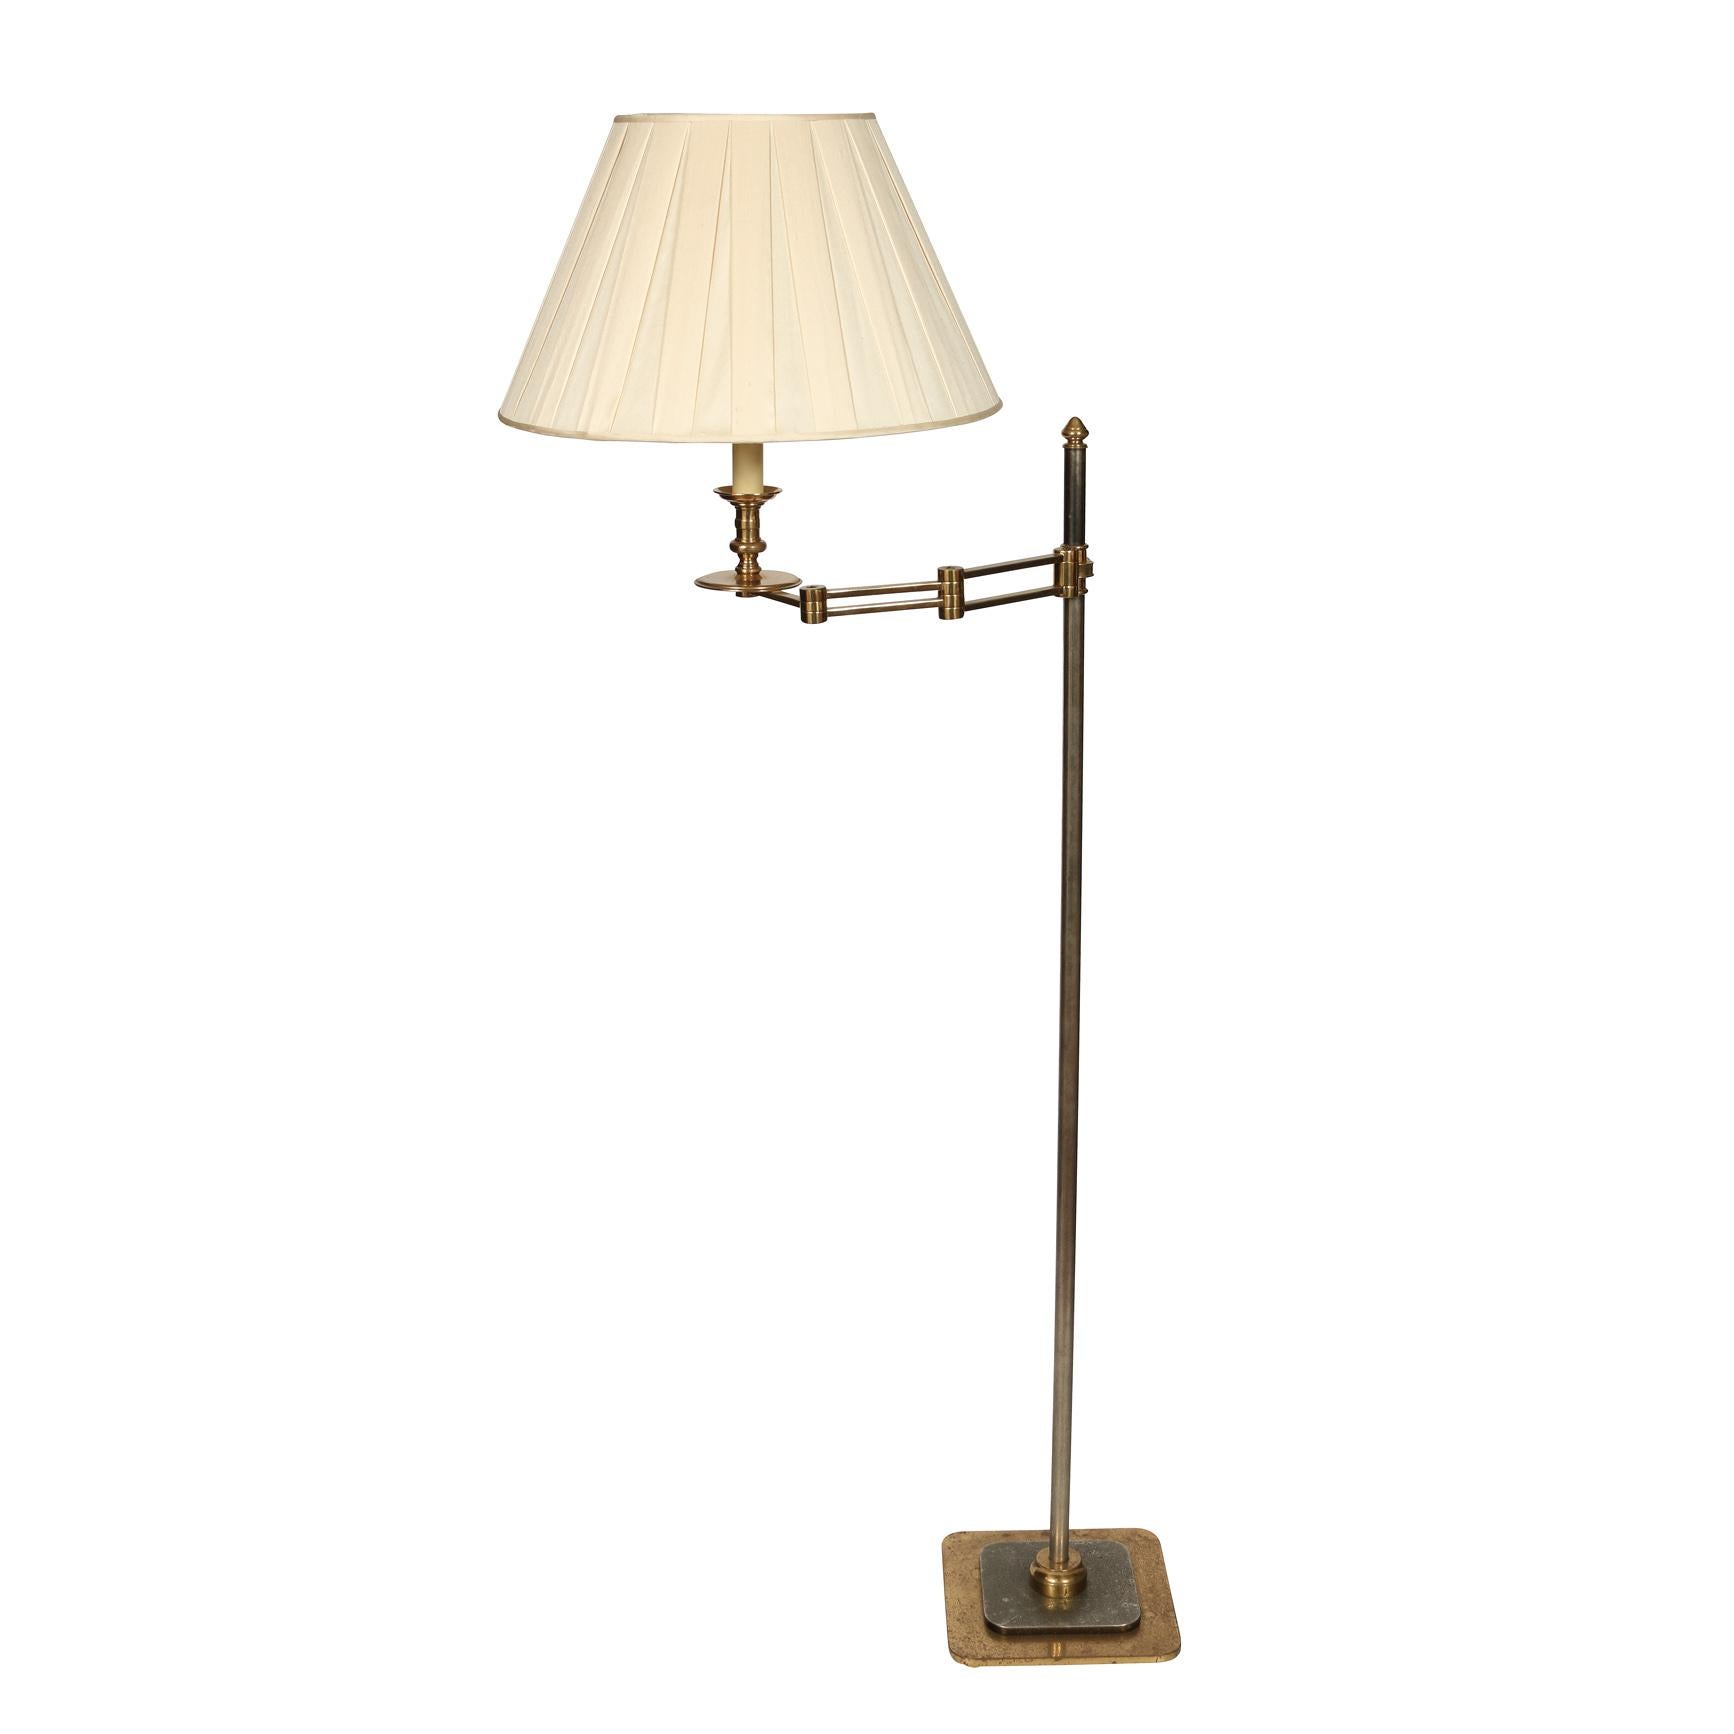 Maison Charles style, vintage brass, swing arm floor lamp. When arm is open it extends to 17